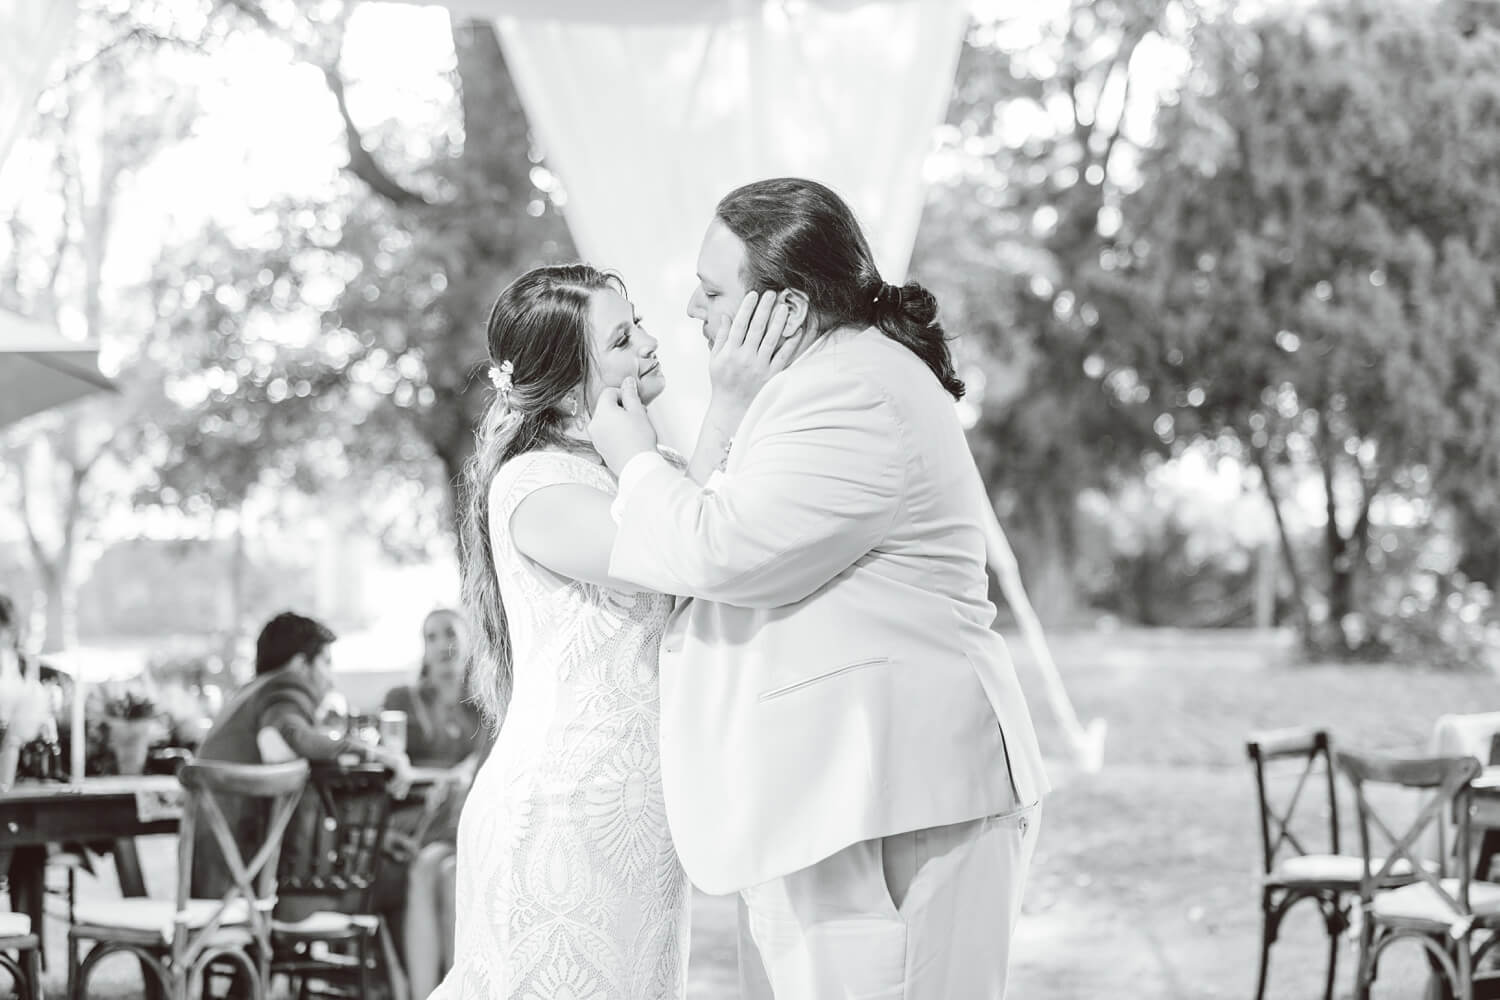 Couple touching each other's faces during first dance | Brooke Michelle Photo